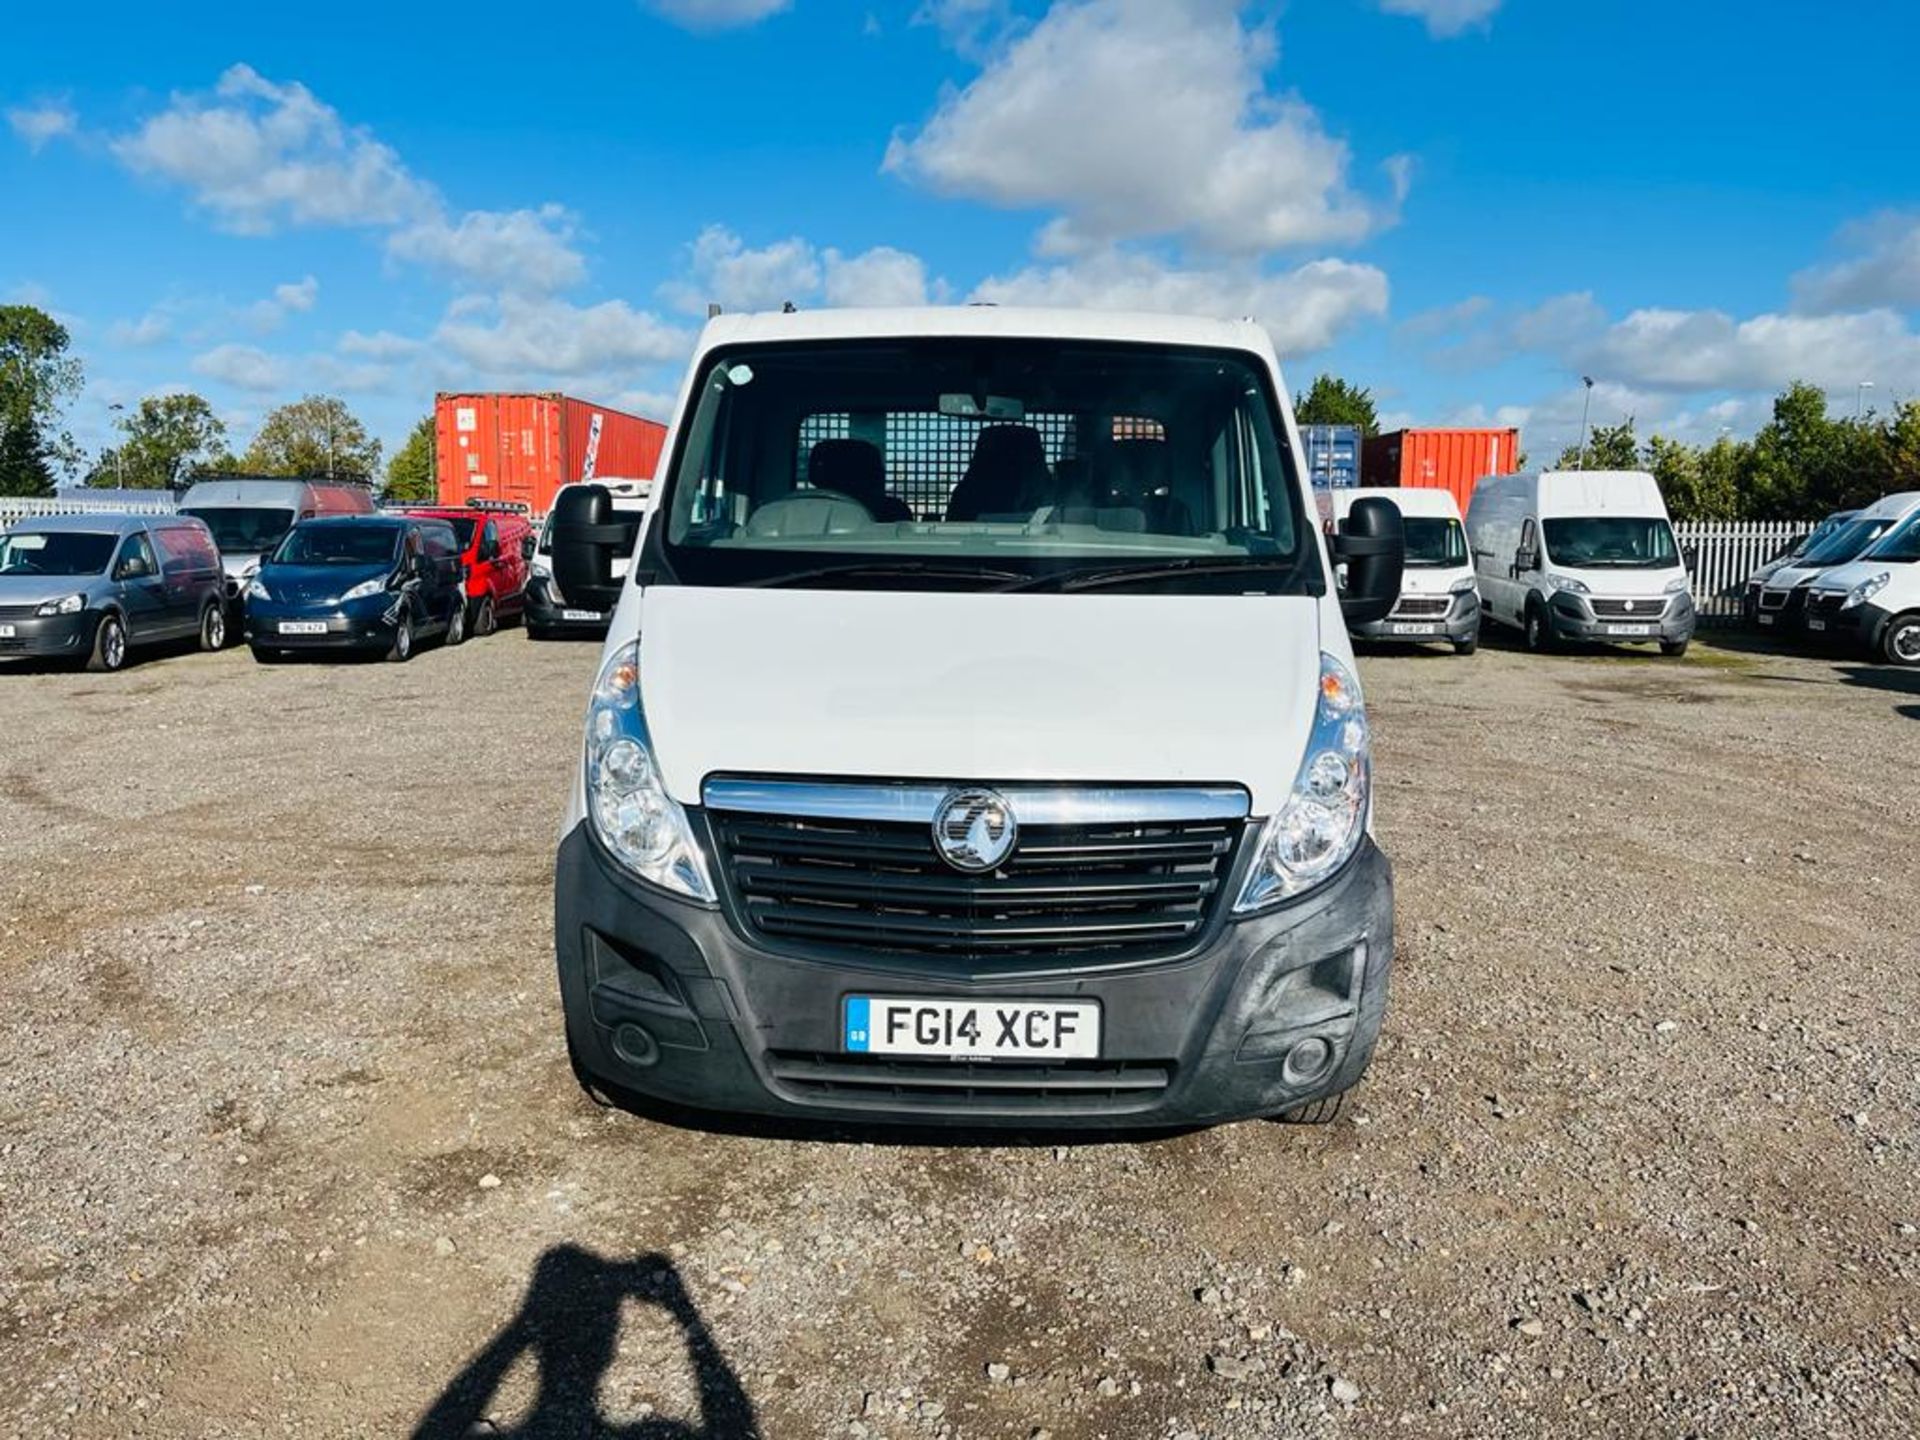 ** ON SALE ** Vauxhall Movano R3500 2.3 CDTI 125 TRW RWD Tipper 2014 '14 Reg' Only 94,206 Miles - Image 3 of 30